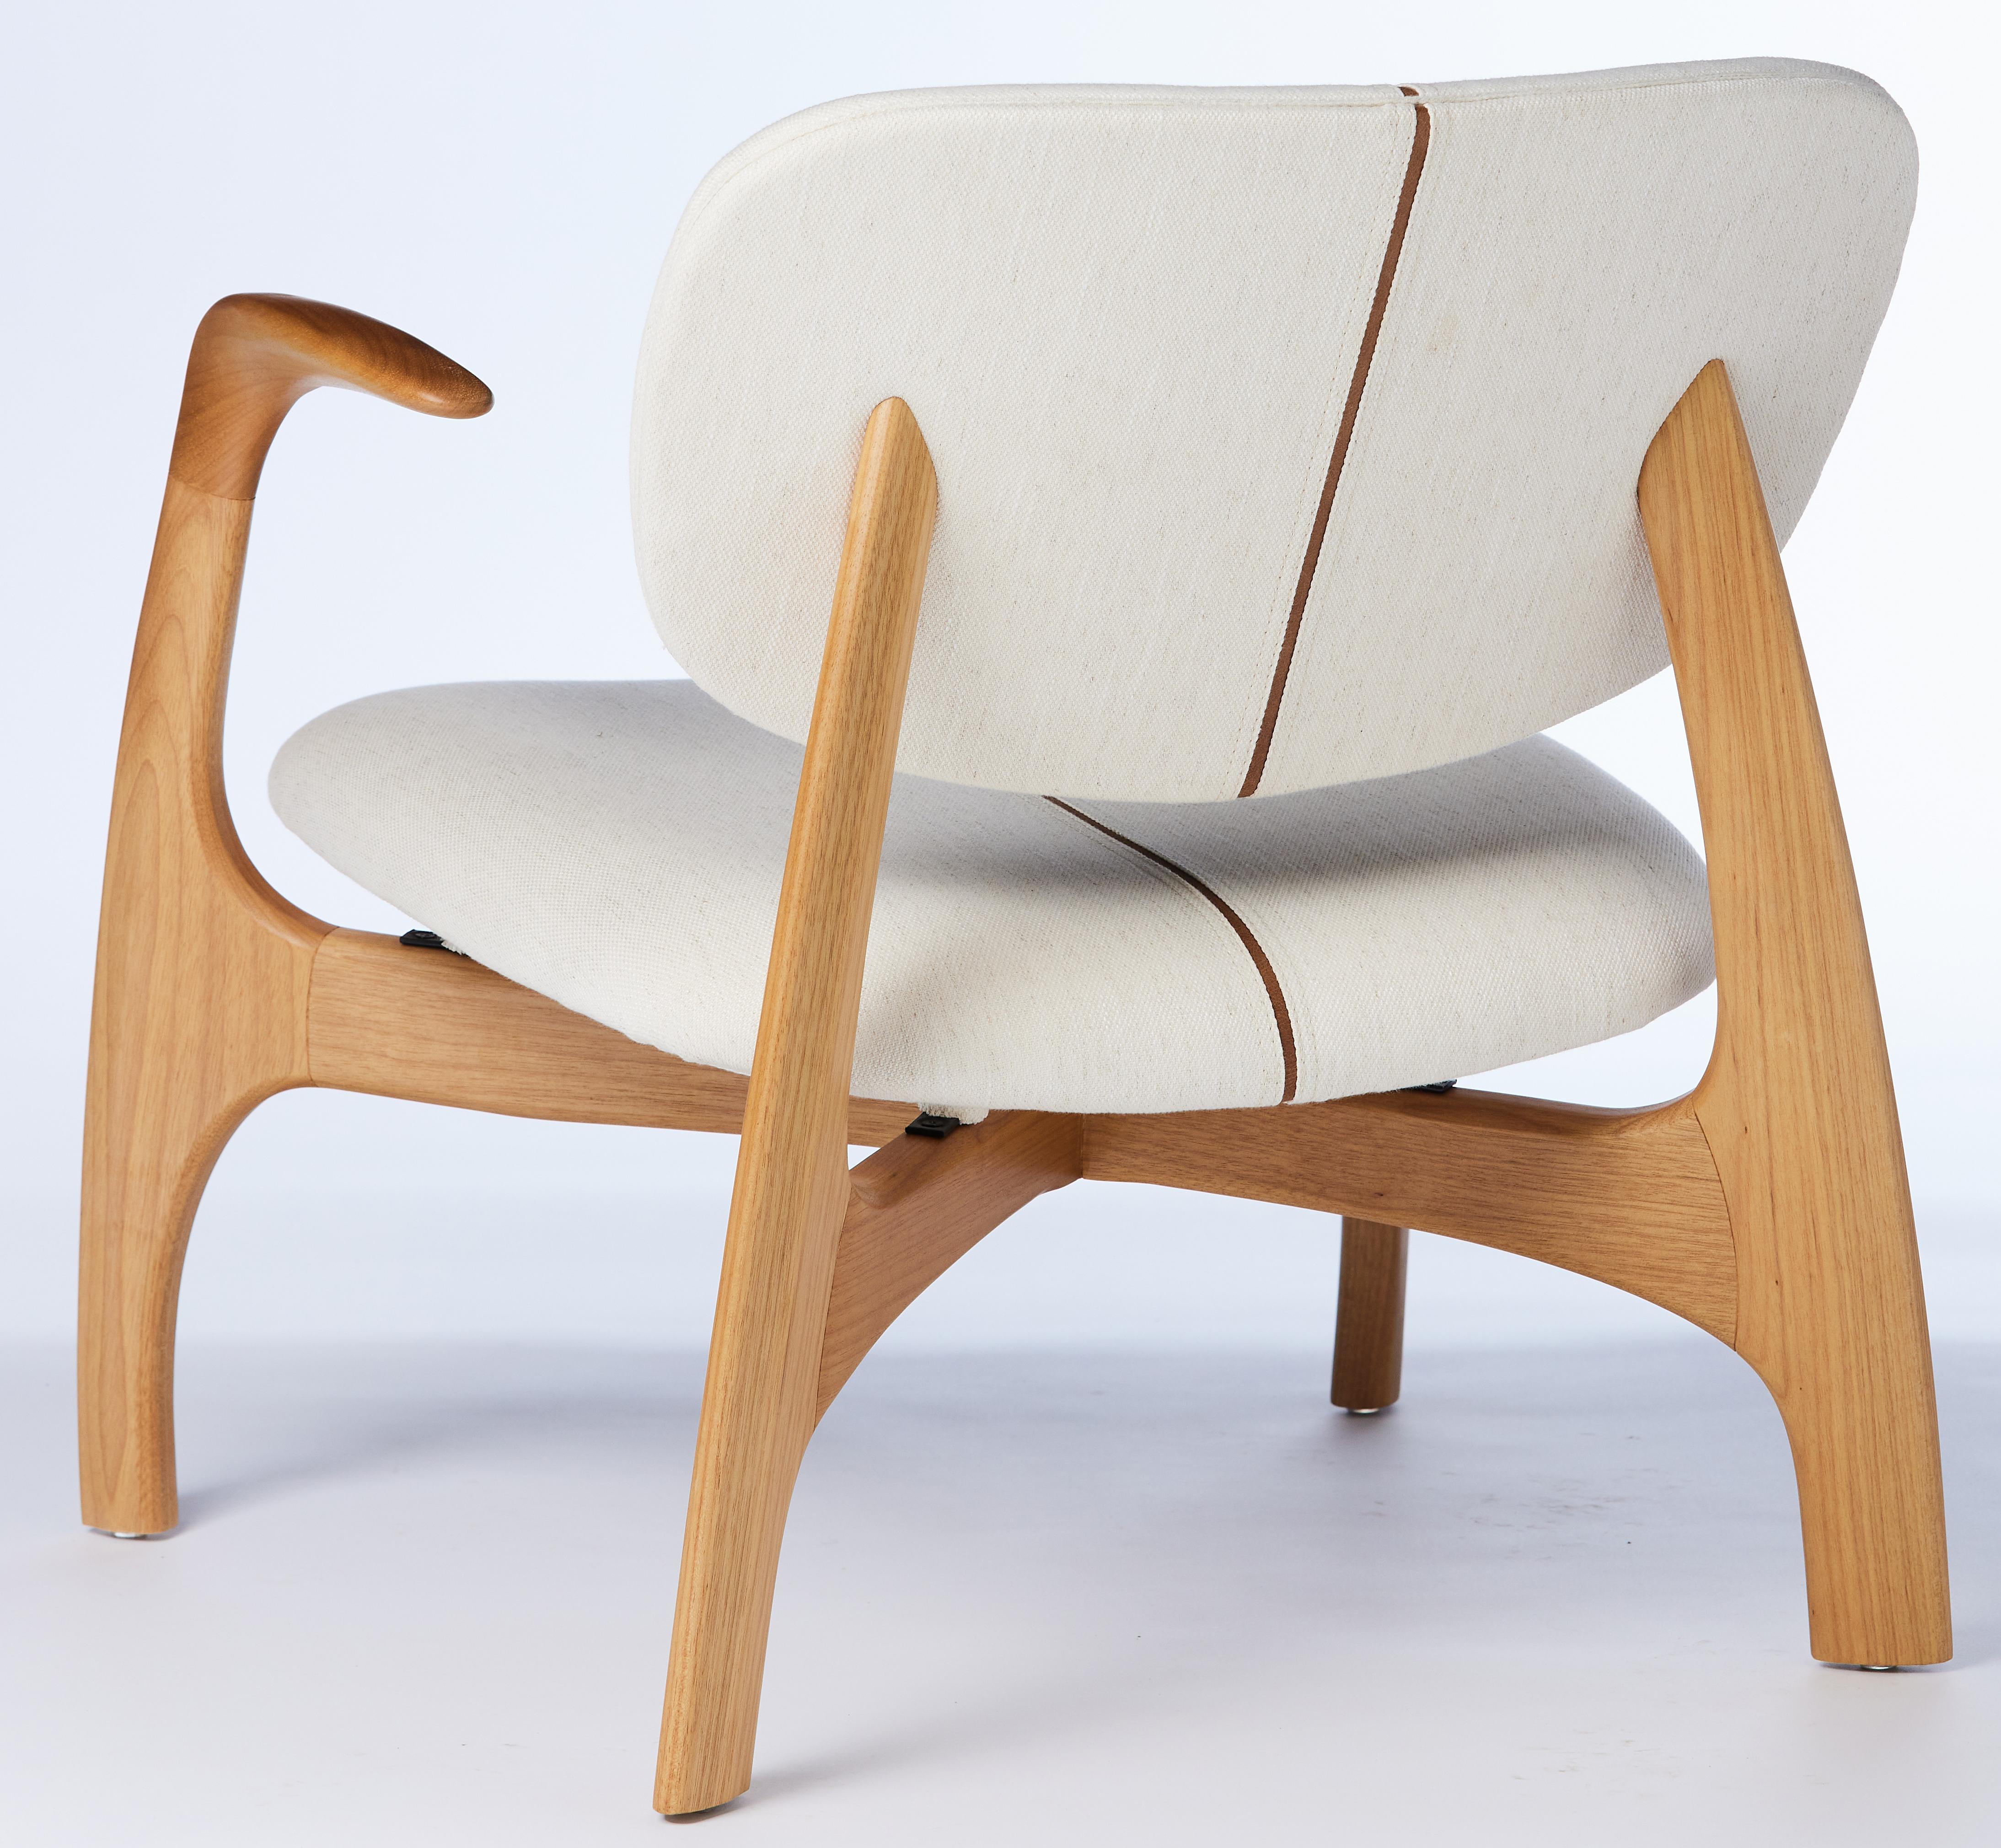 Surf Brazilian Contemporary Wood and Fabric Easychair by Lattoog In New Condition For Sale In Sao Paolo, BR